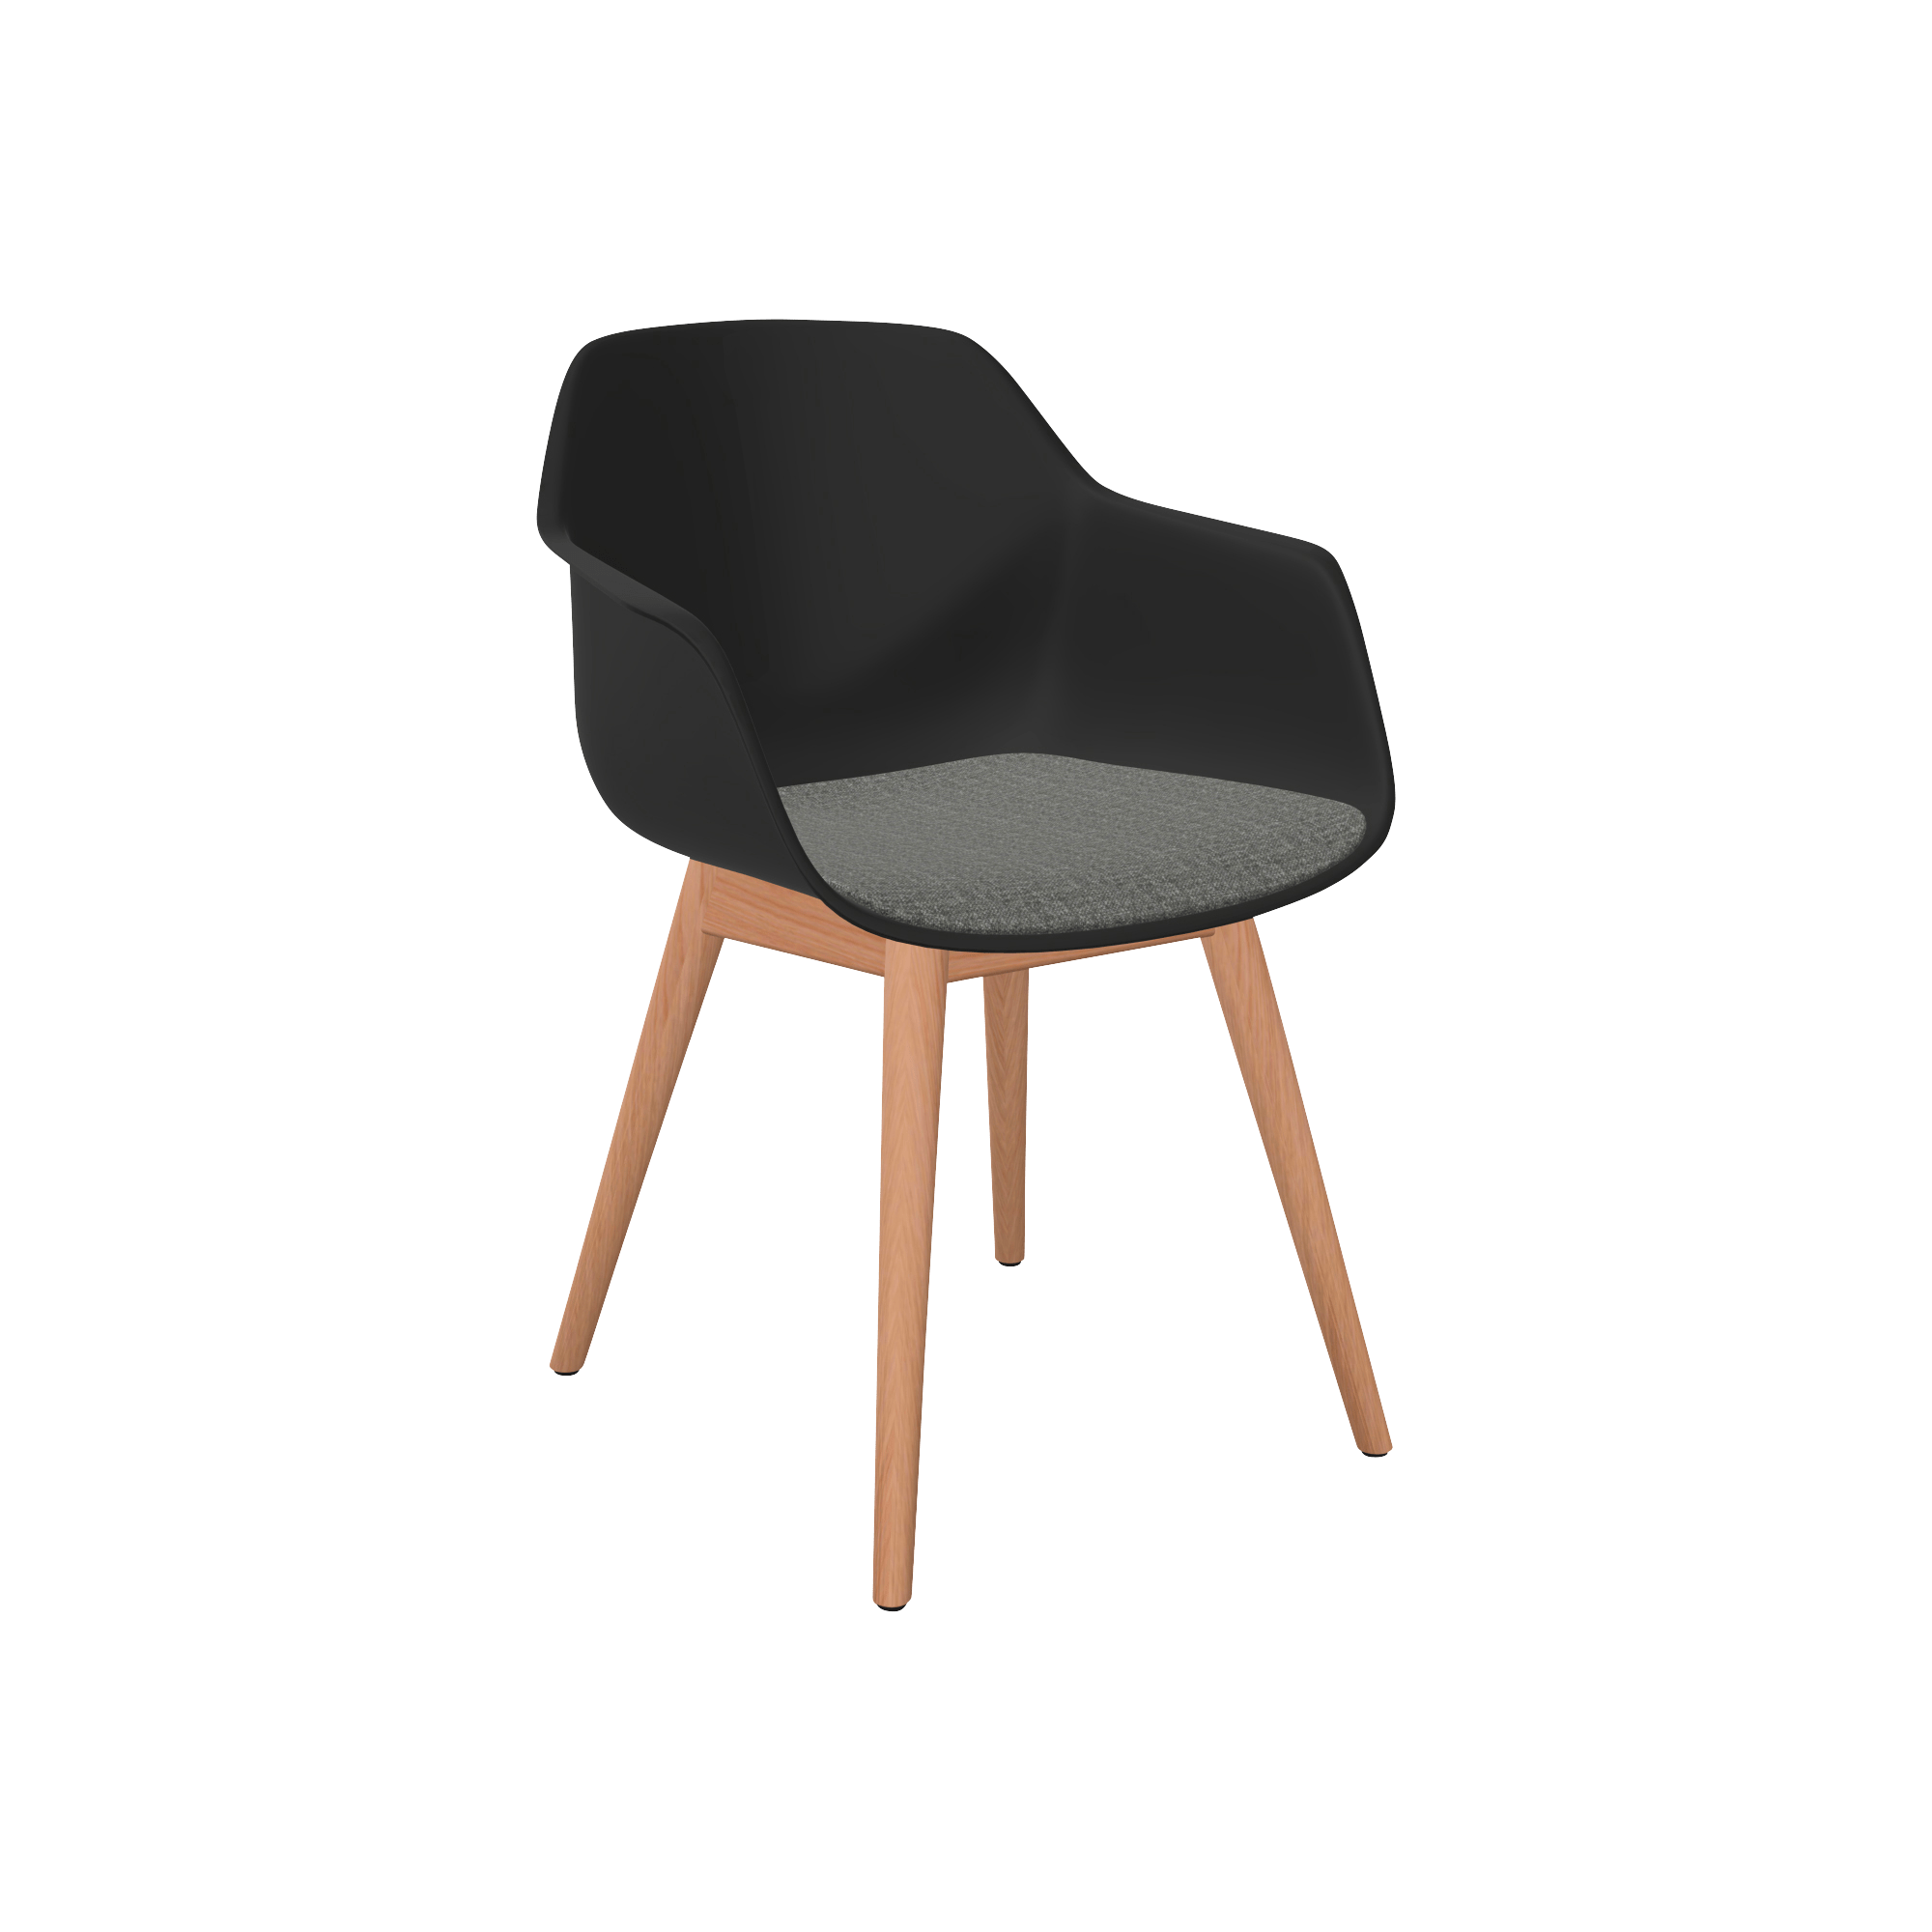 A black plastic chair with wooden legs.